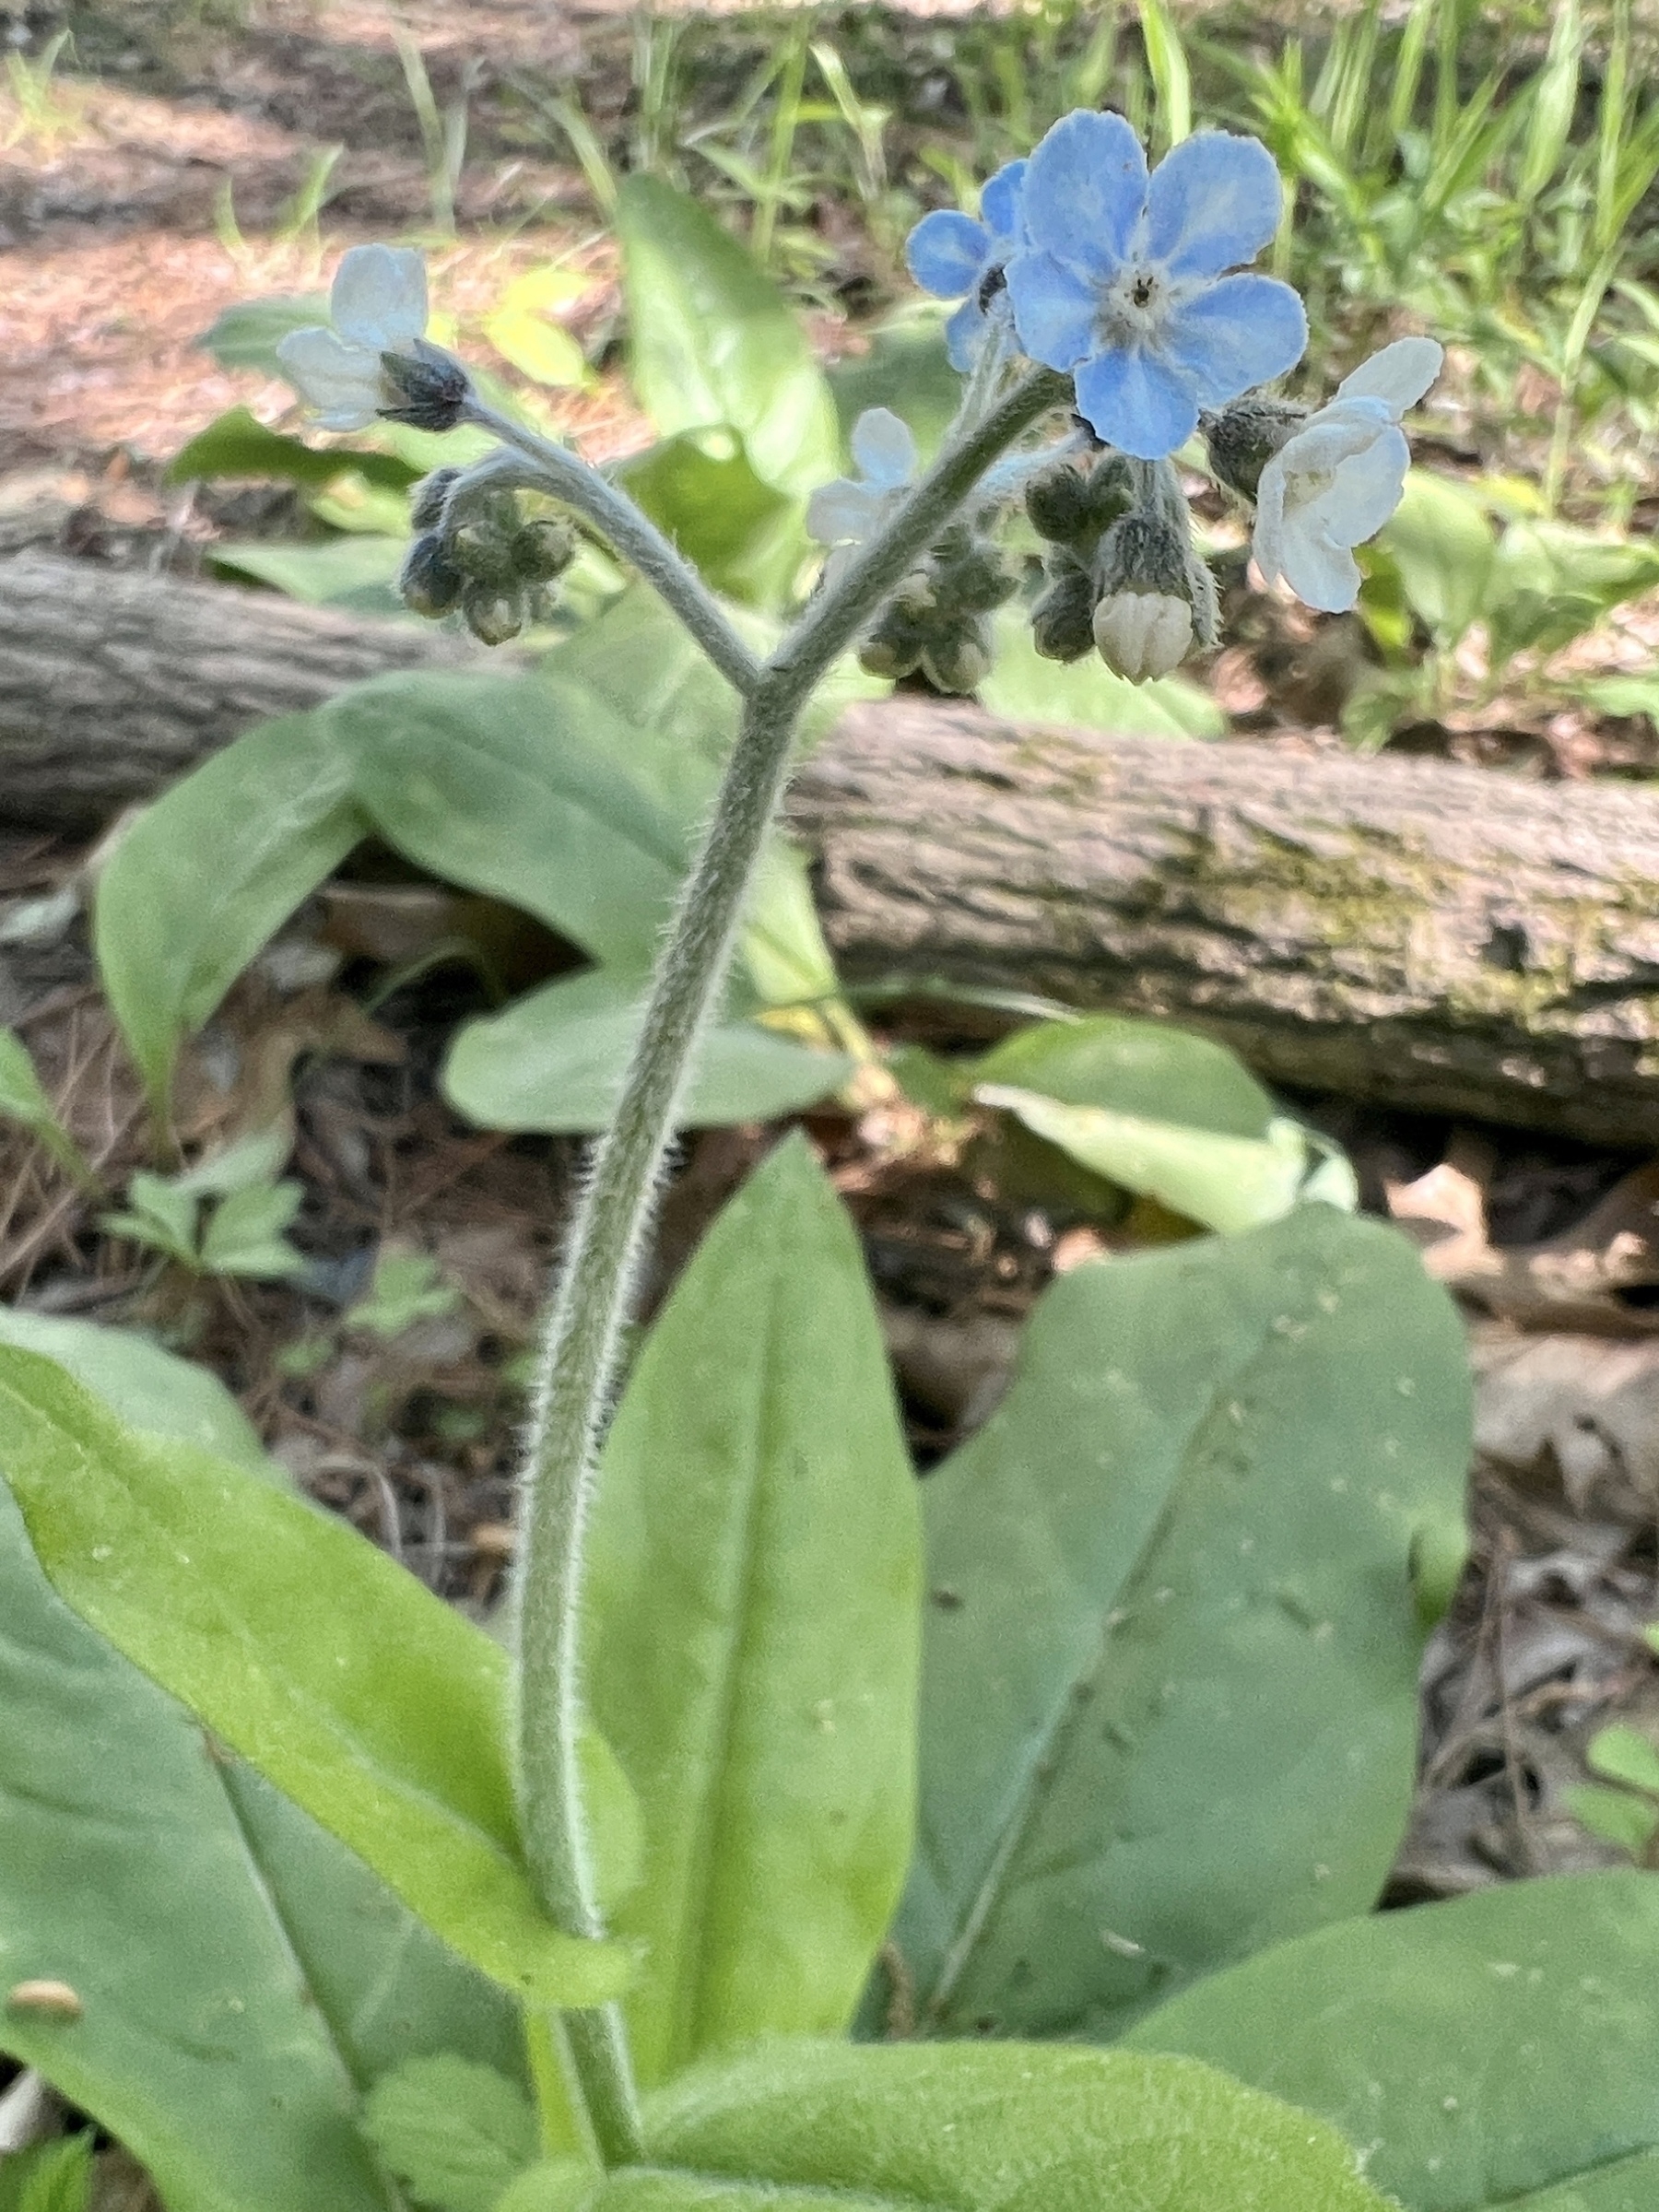 A large leaved plant with simple looking flowers that are grouped at the top of a hairy stem. The flowers are blue and have five rounded petals